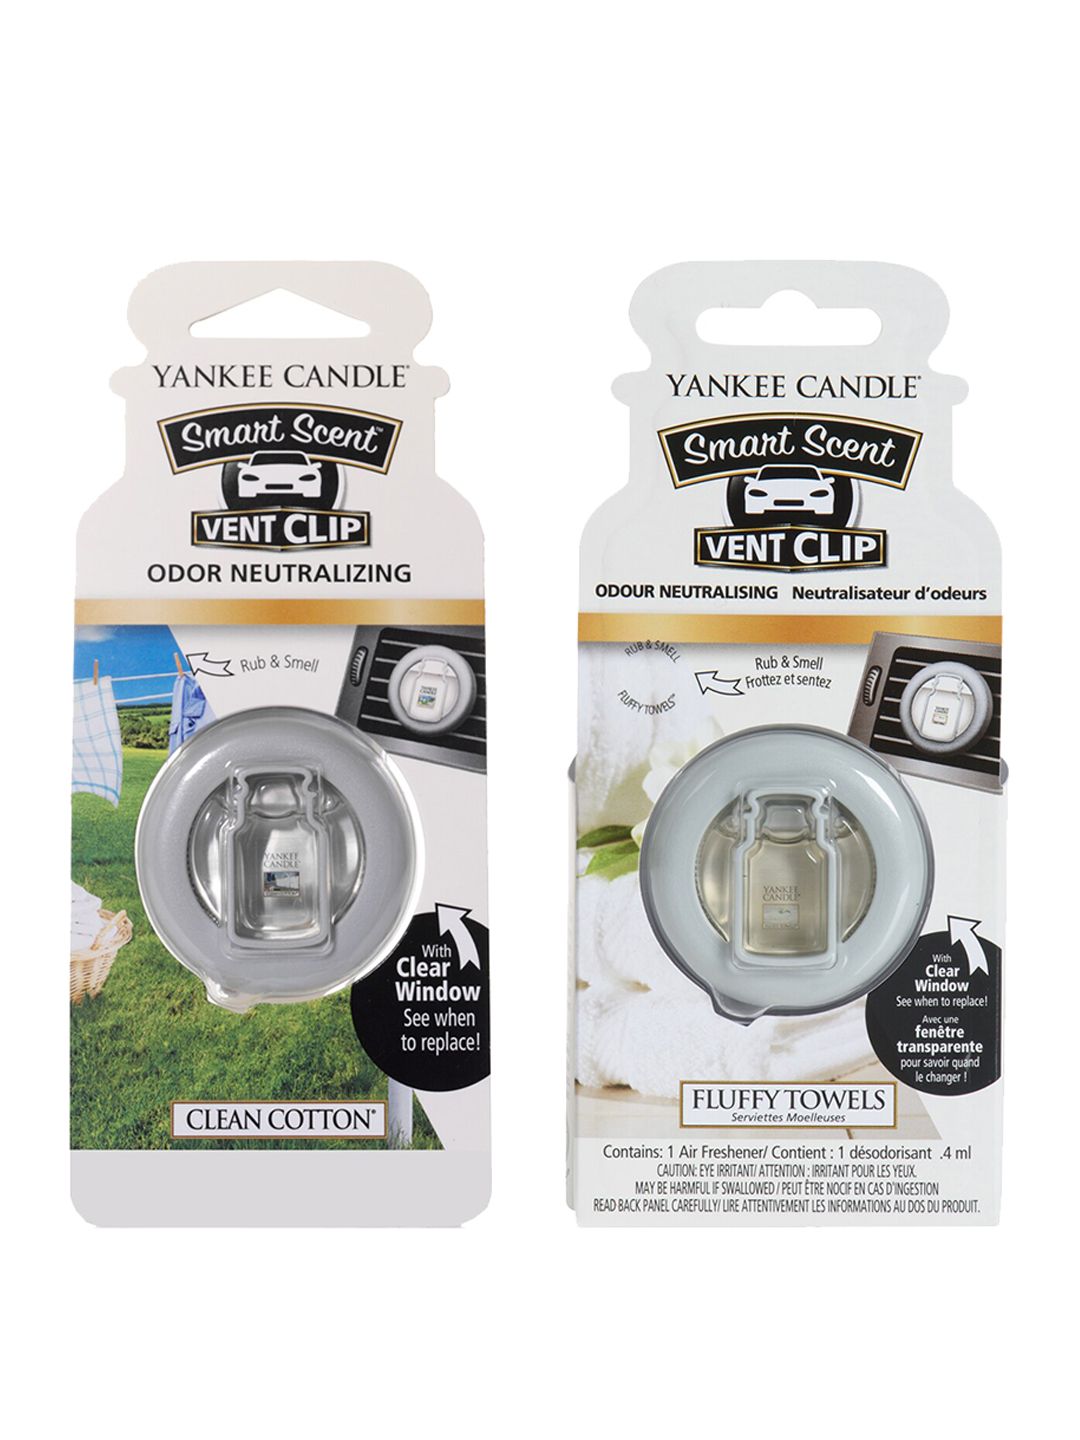 YANKEE CANDLE Set of 2 Smart Scent Vent Clip Air Freshener Price in India